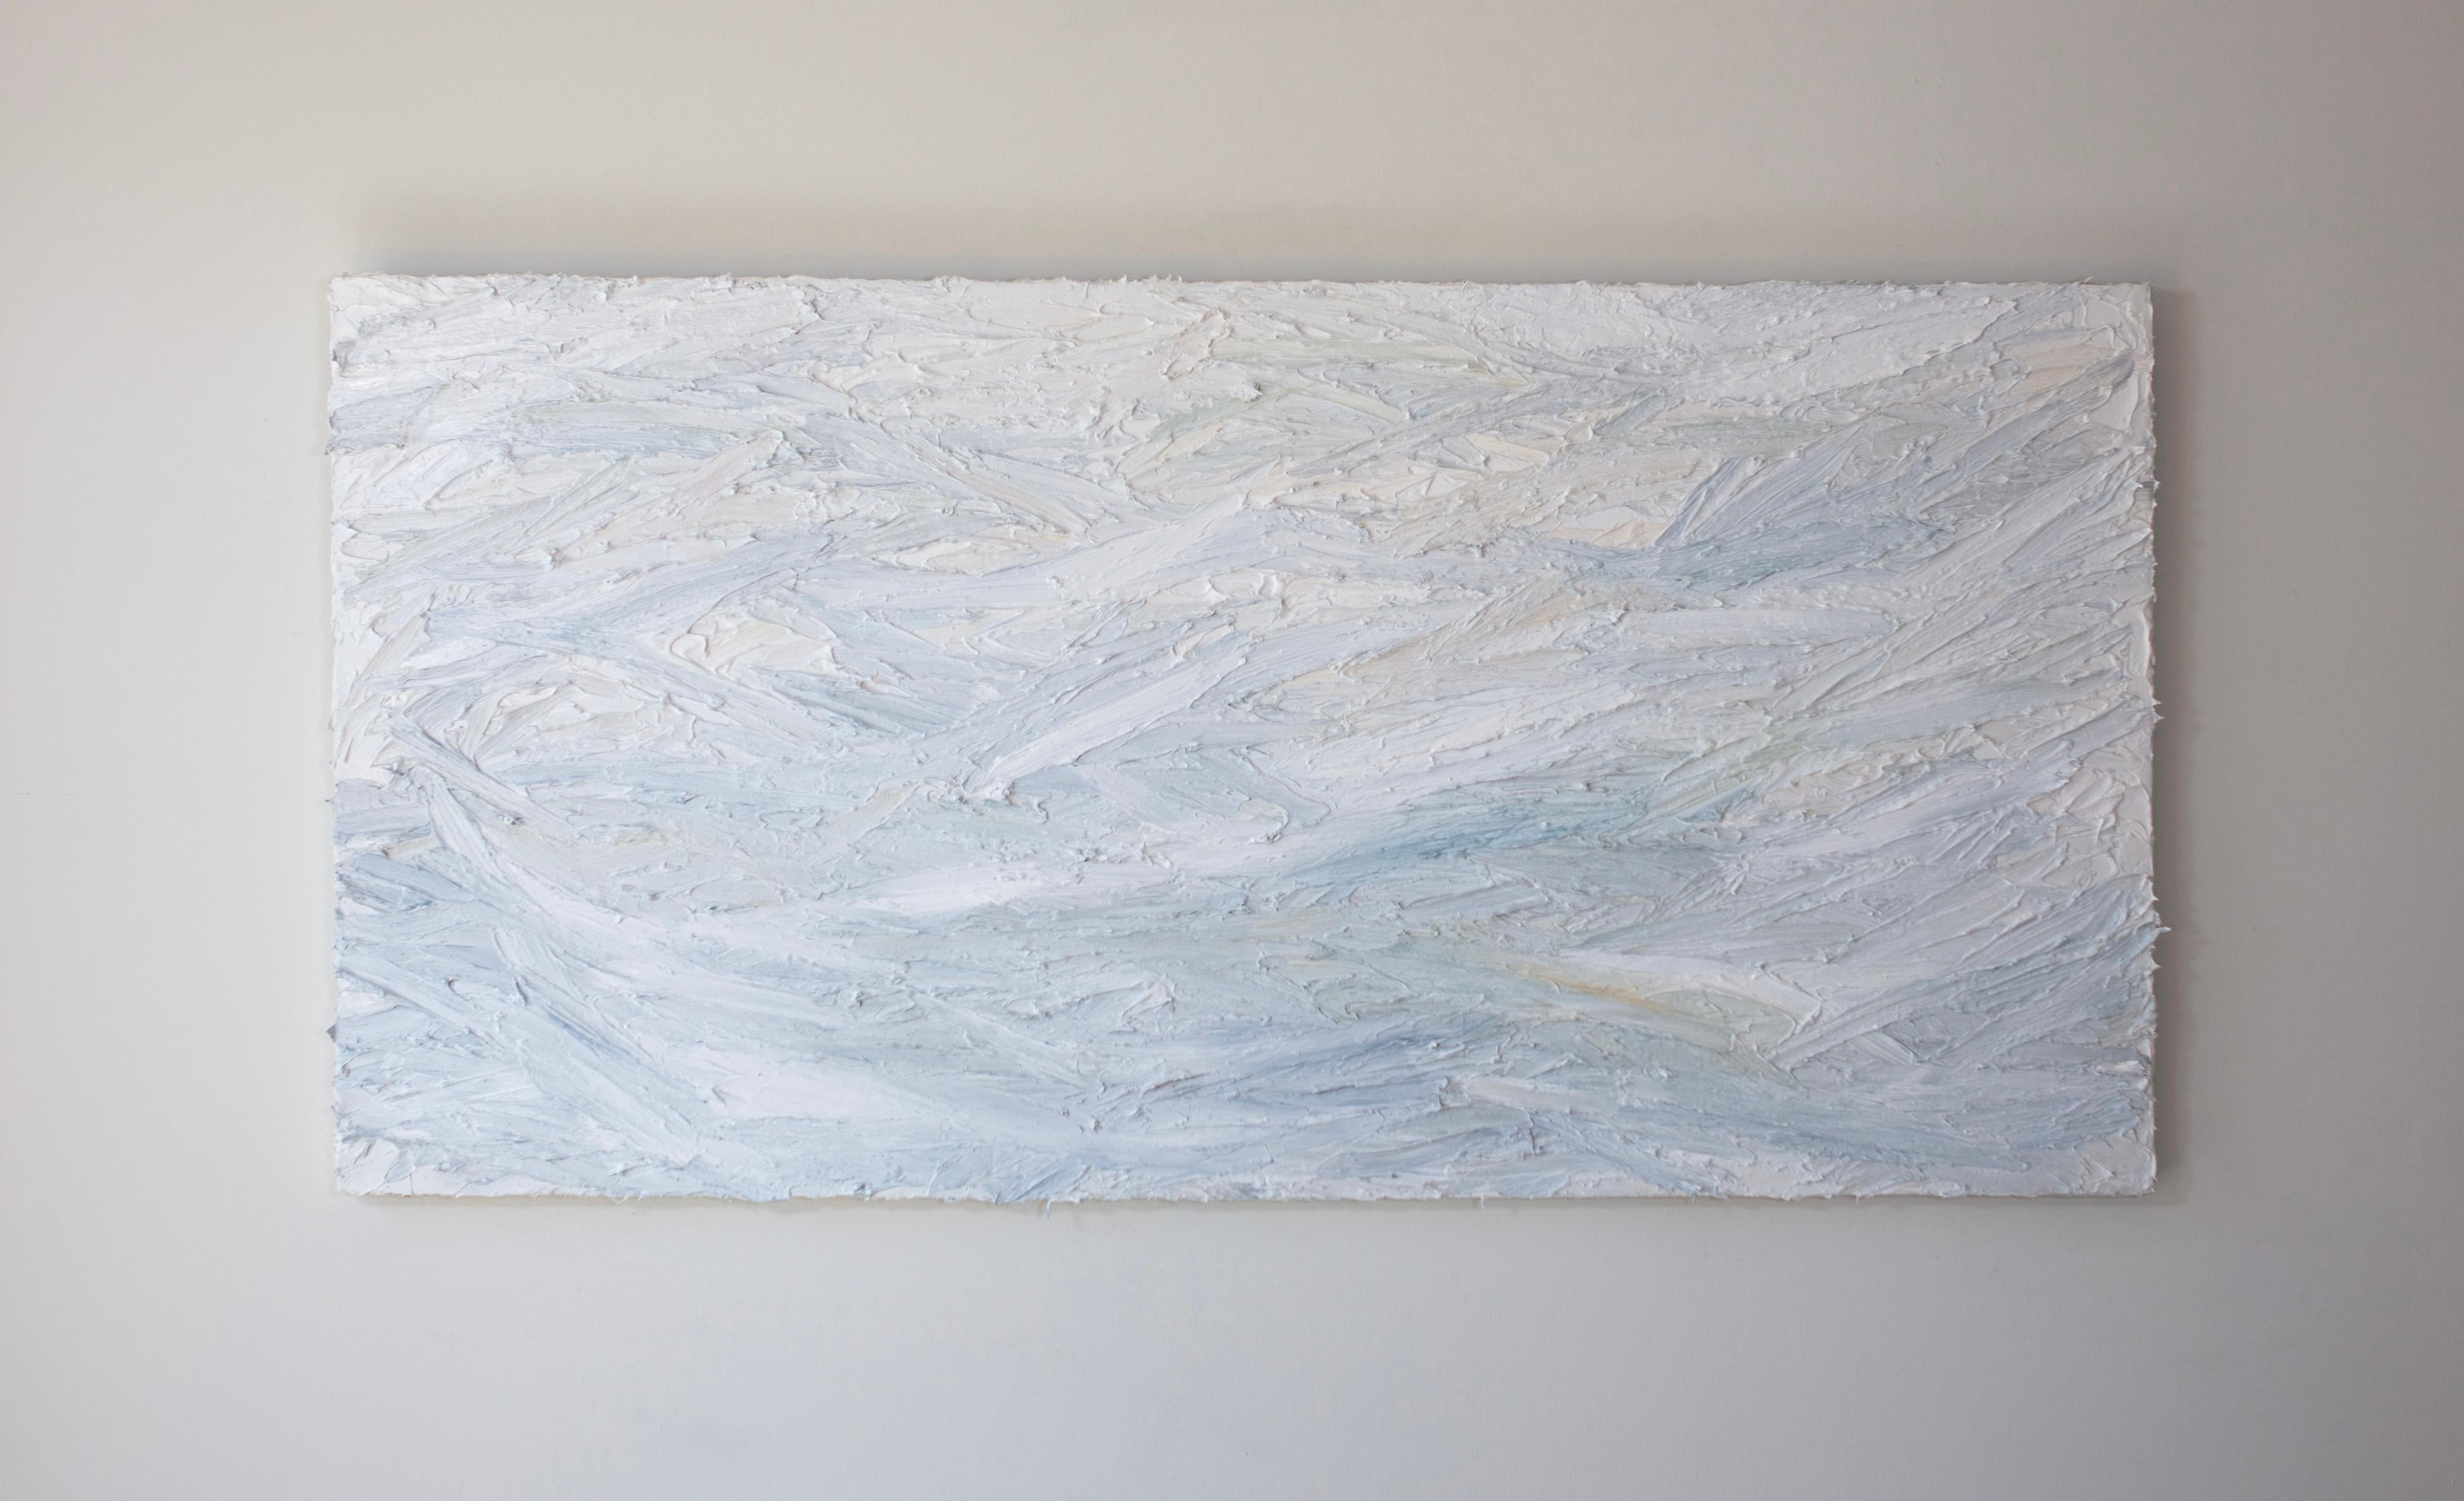 This large abstract statement painting by Teodora Guererra features a light, cool palette of primarily blue and white, with very subtle light yellow accents. The artist applies thick layers of paint in quick gestures, creating a highly textured